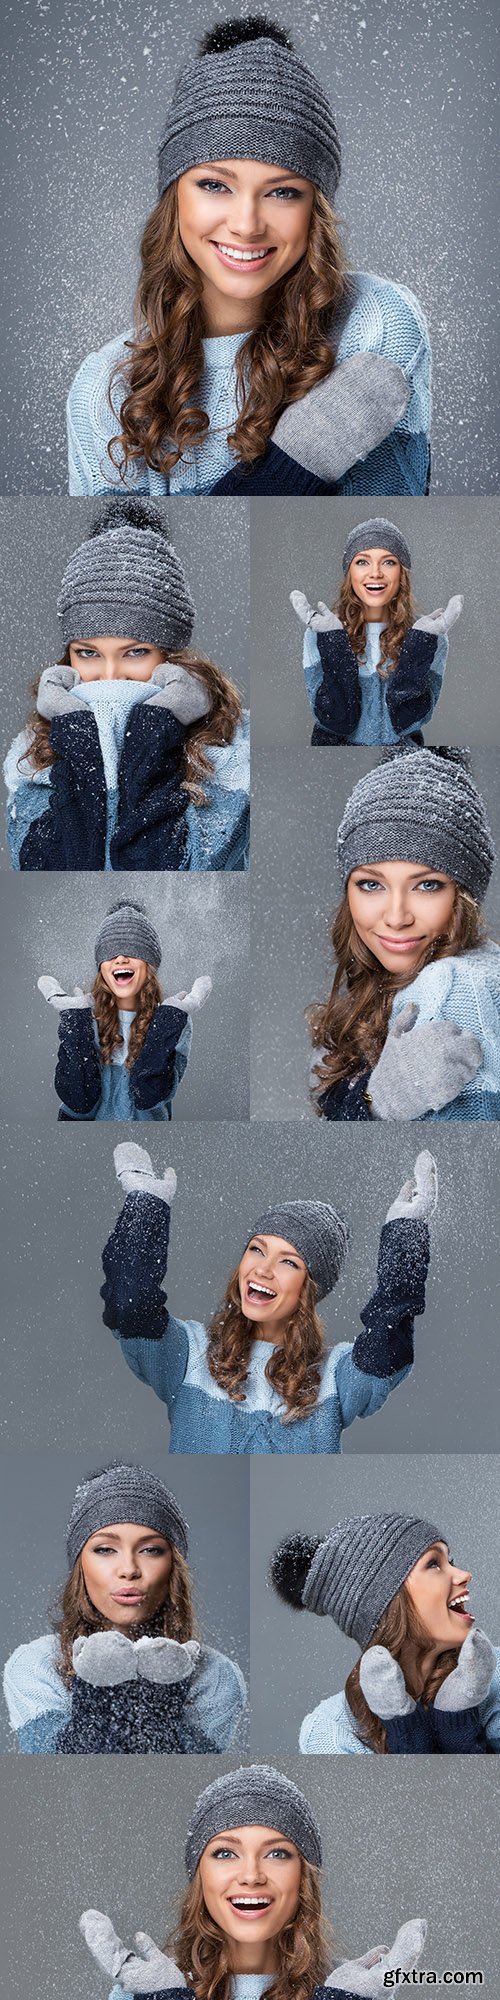 Cute girl in winter hat and wares with snowflakes